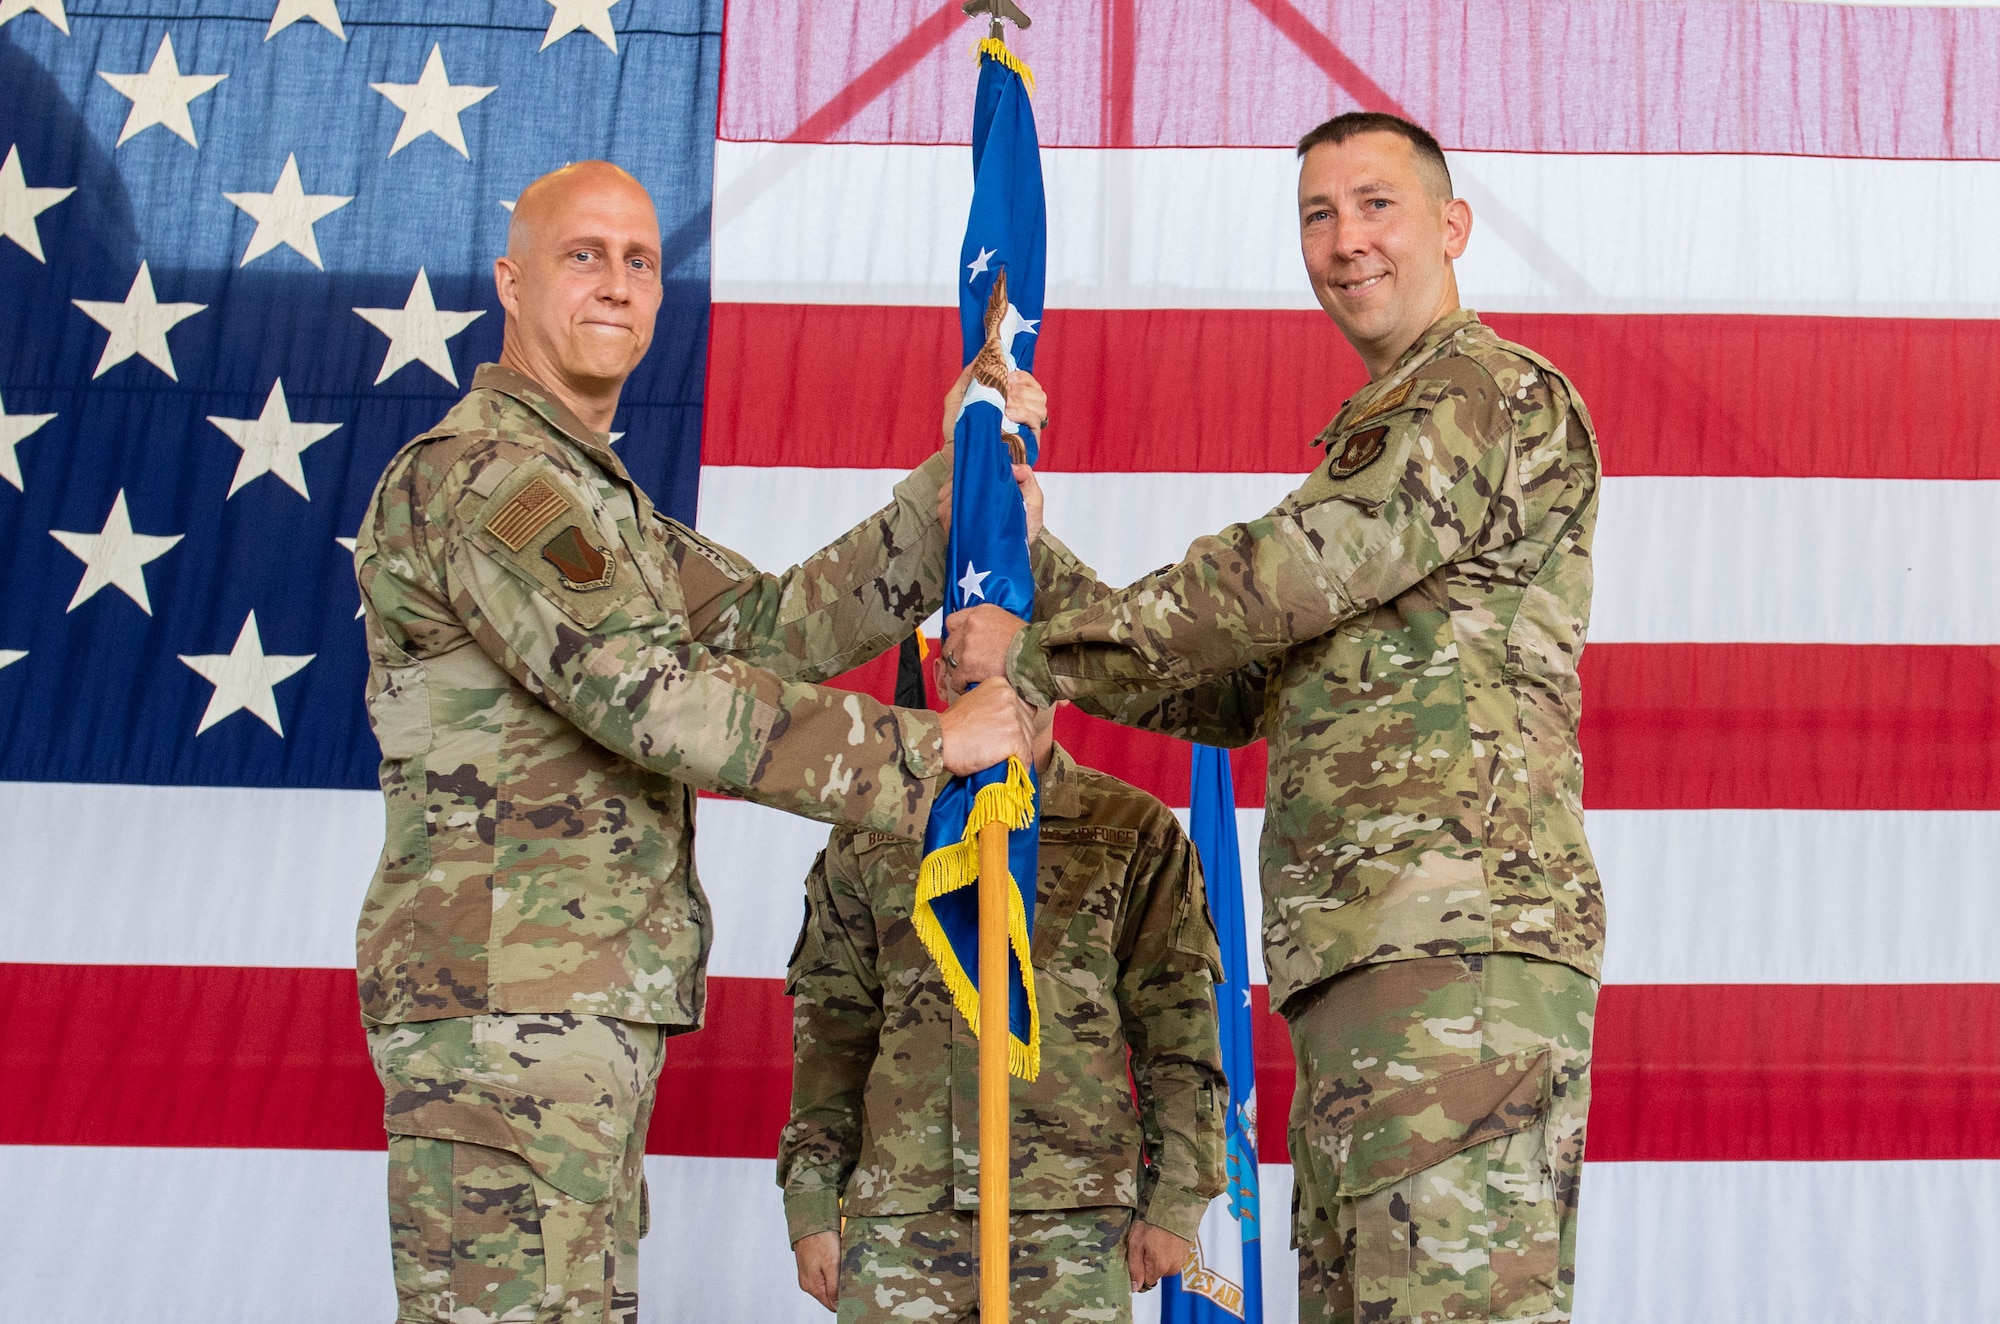 U.S. Air Force Brig. Gen. Joshua M. Olson, 86th Airlift Wing commander, left, hands over command of the 86th Civil Engineer Group to Col. Steven Thomas, 86 CEG incoming commander, during a change of command ceremony at Ramstein Air Base, Germany